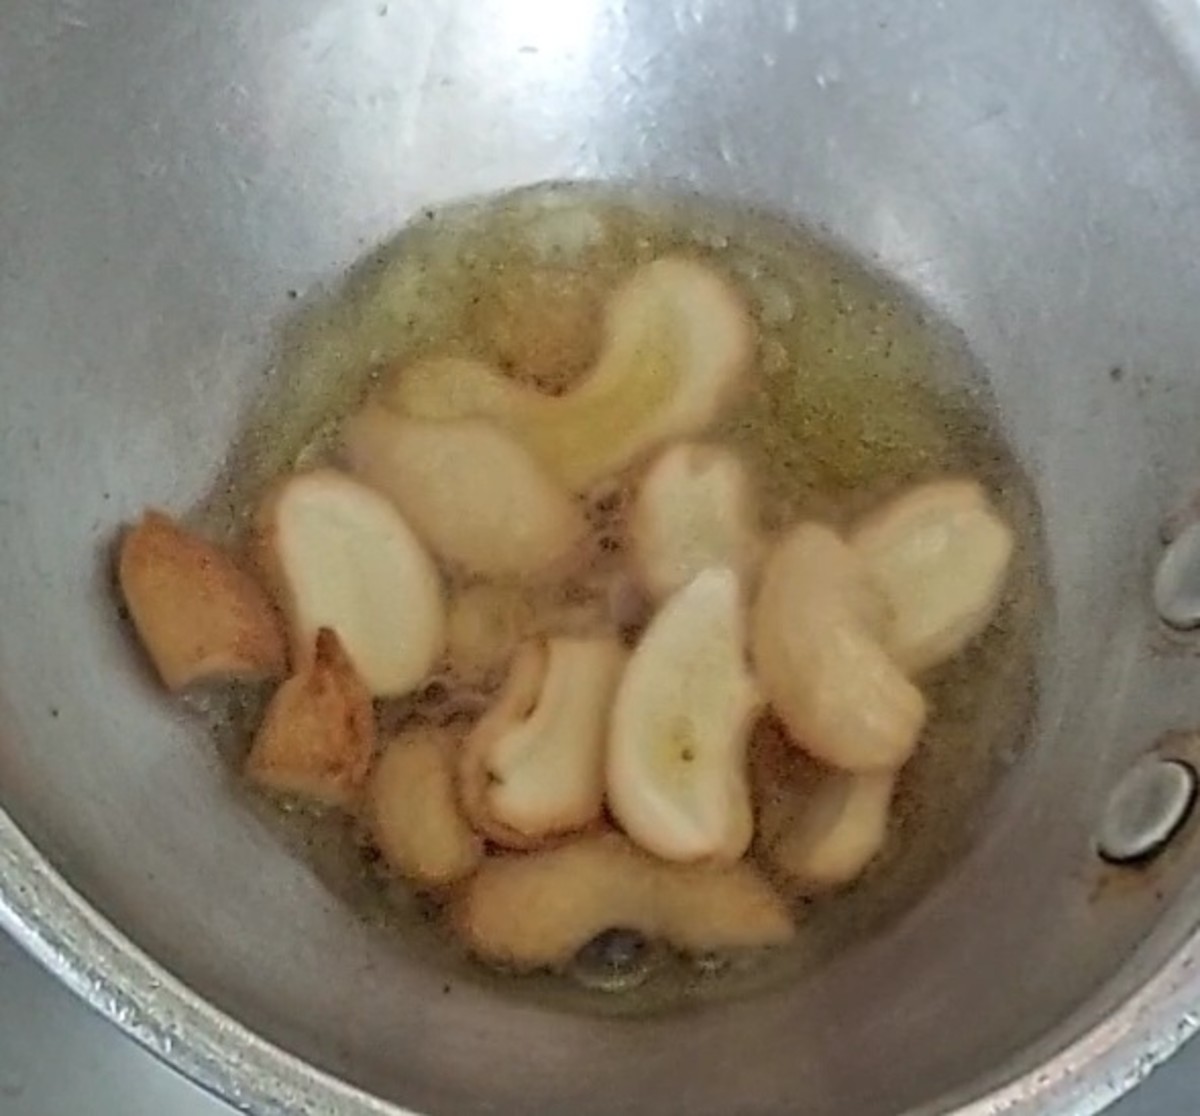 In a pan heat 1 tablespoon ghee, add 5-6 cashews and fry till brown. Switch off the flame.